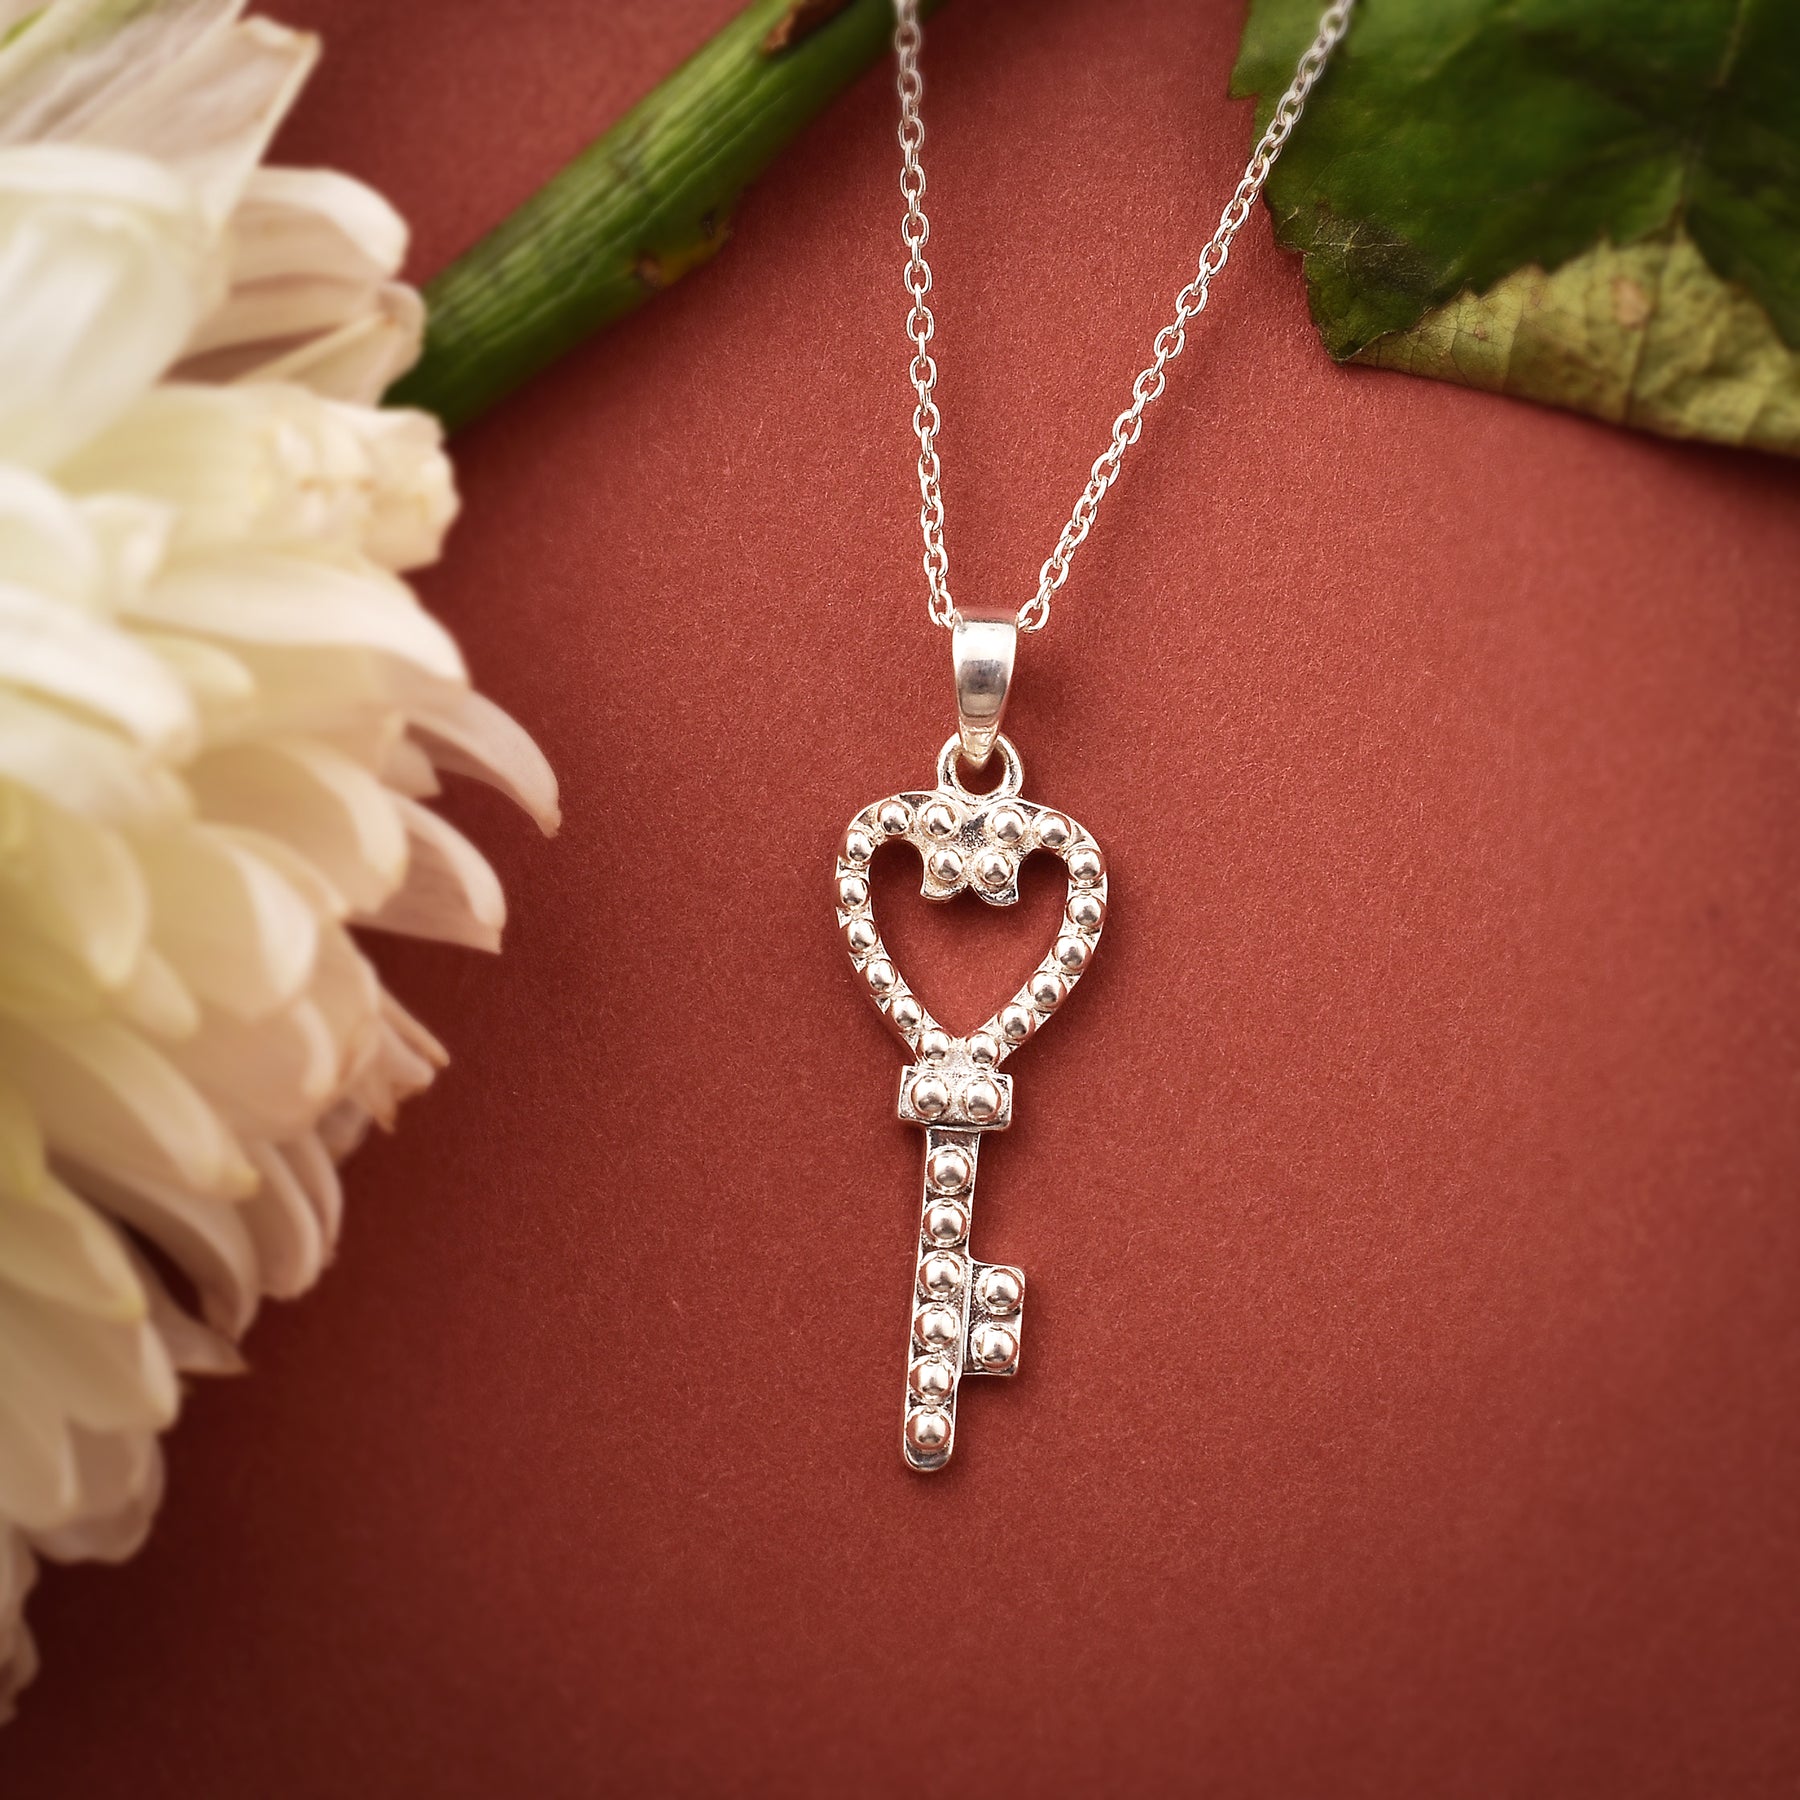 925 Sterling Silver Love Key Chain Necklace Gift for Her